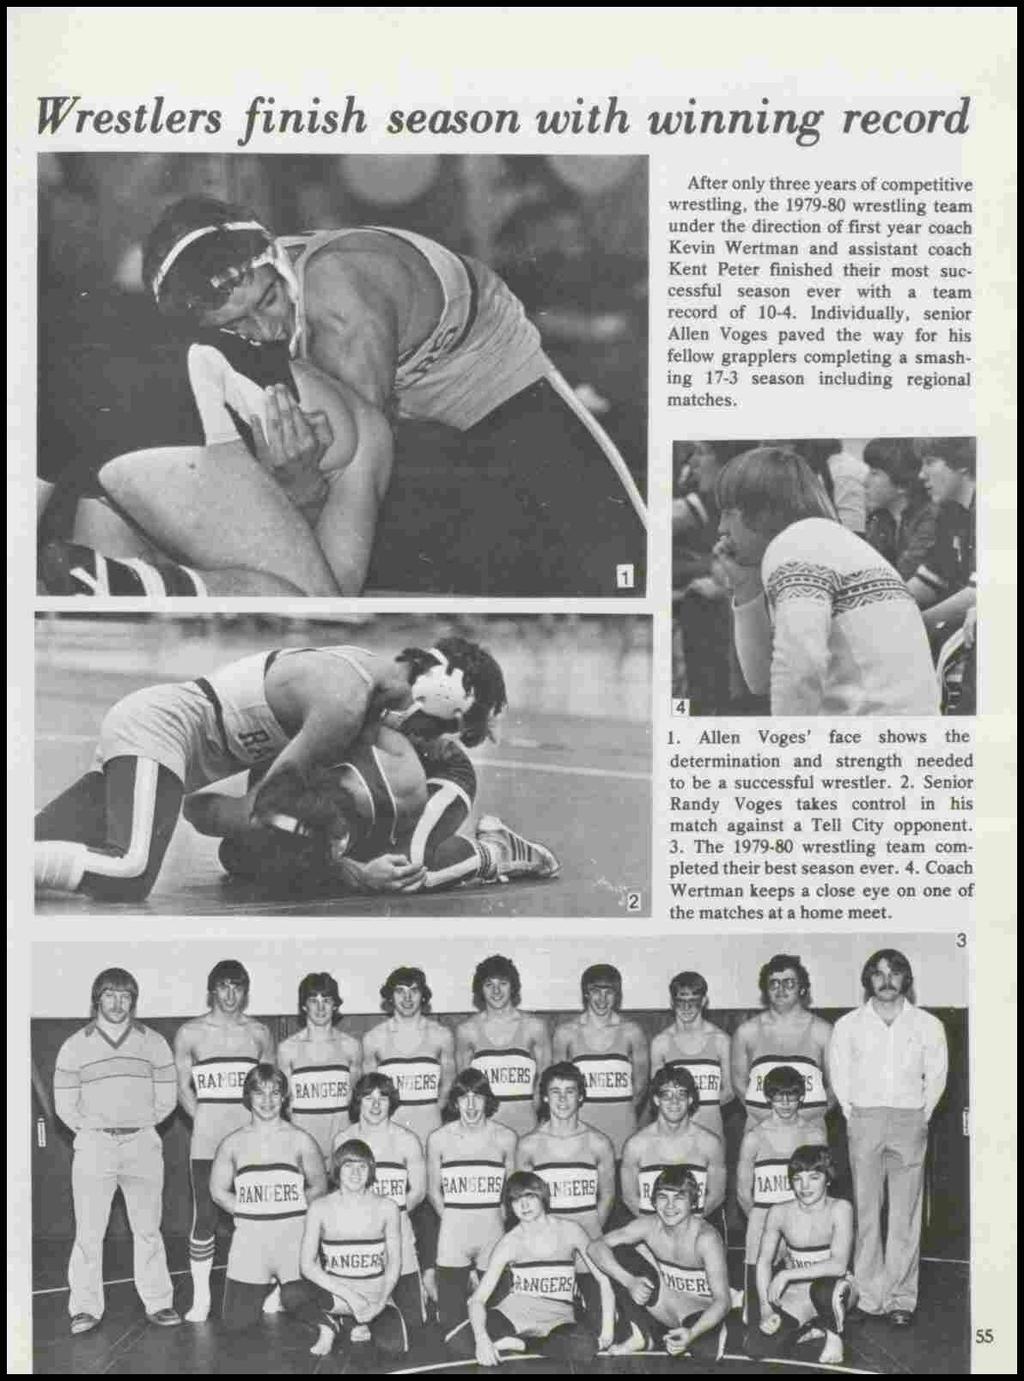 Wrestlers finish season with winning record After only three years of competitive wrestling, the 1979-80 wrestling team under the direction of first year coach Kevin Wertman and assistant coach Kent